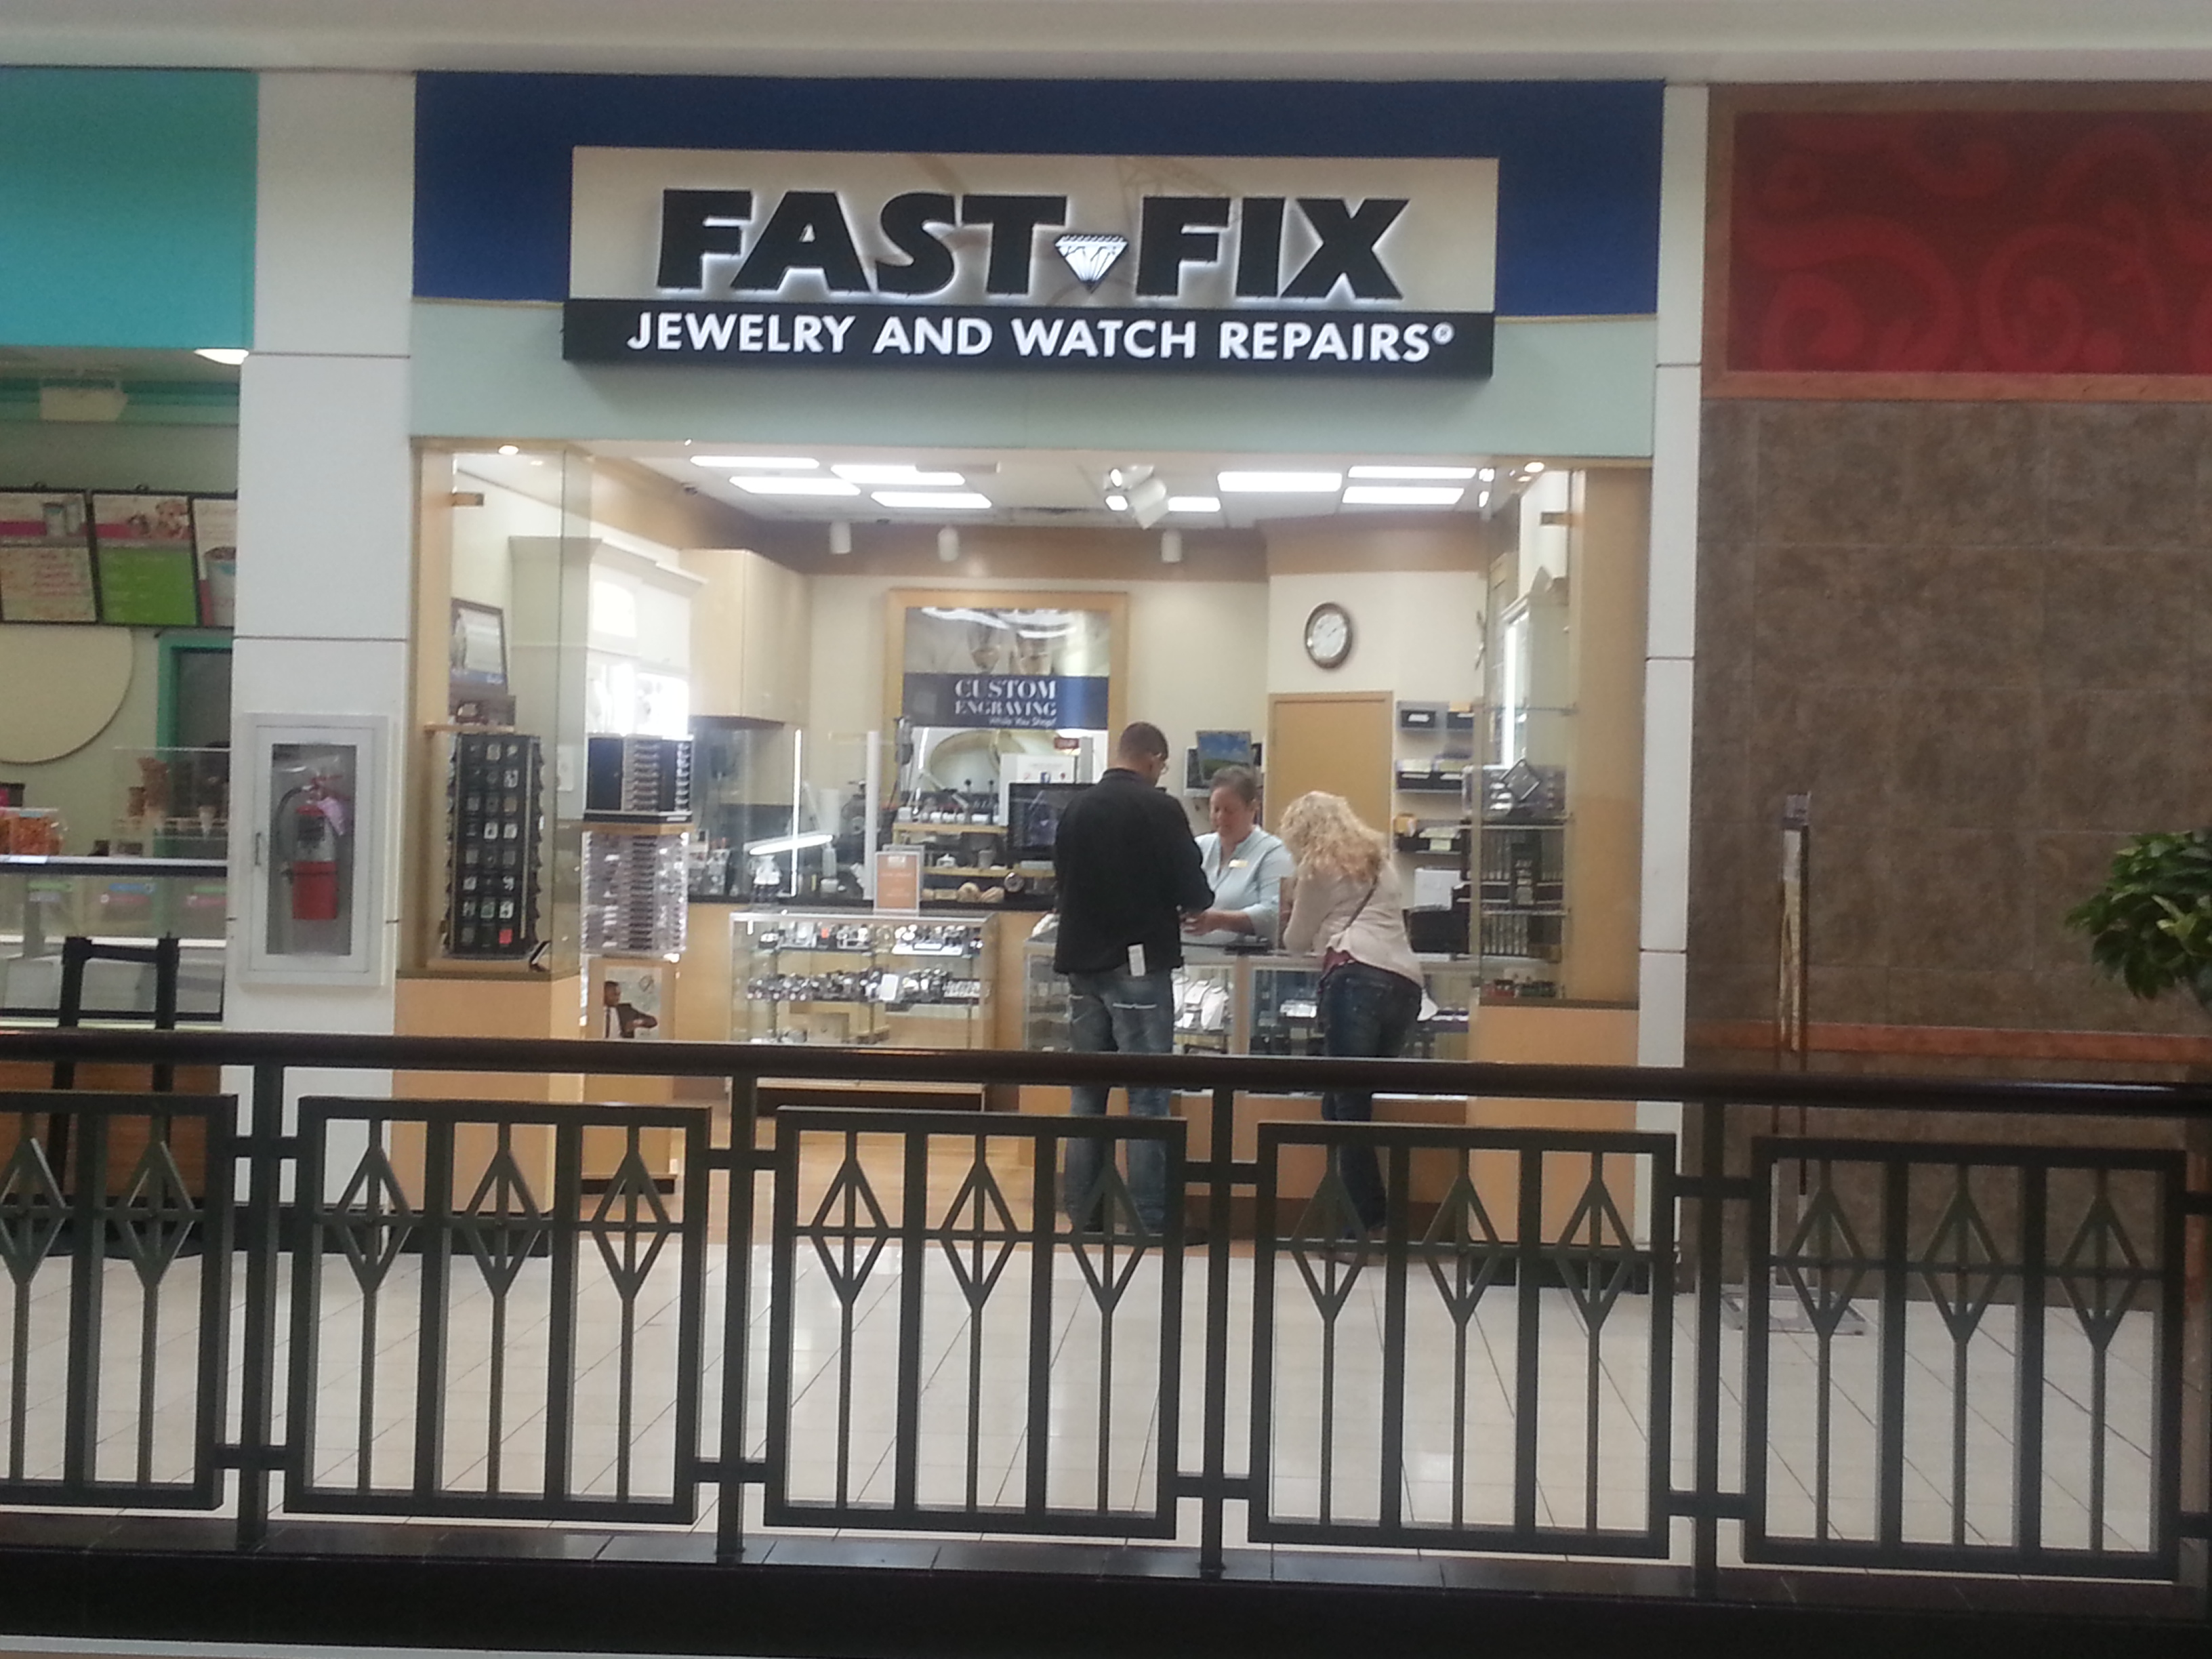 King of Prussia | Fast-Fix Jewelry and Watch Repairs